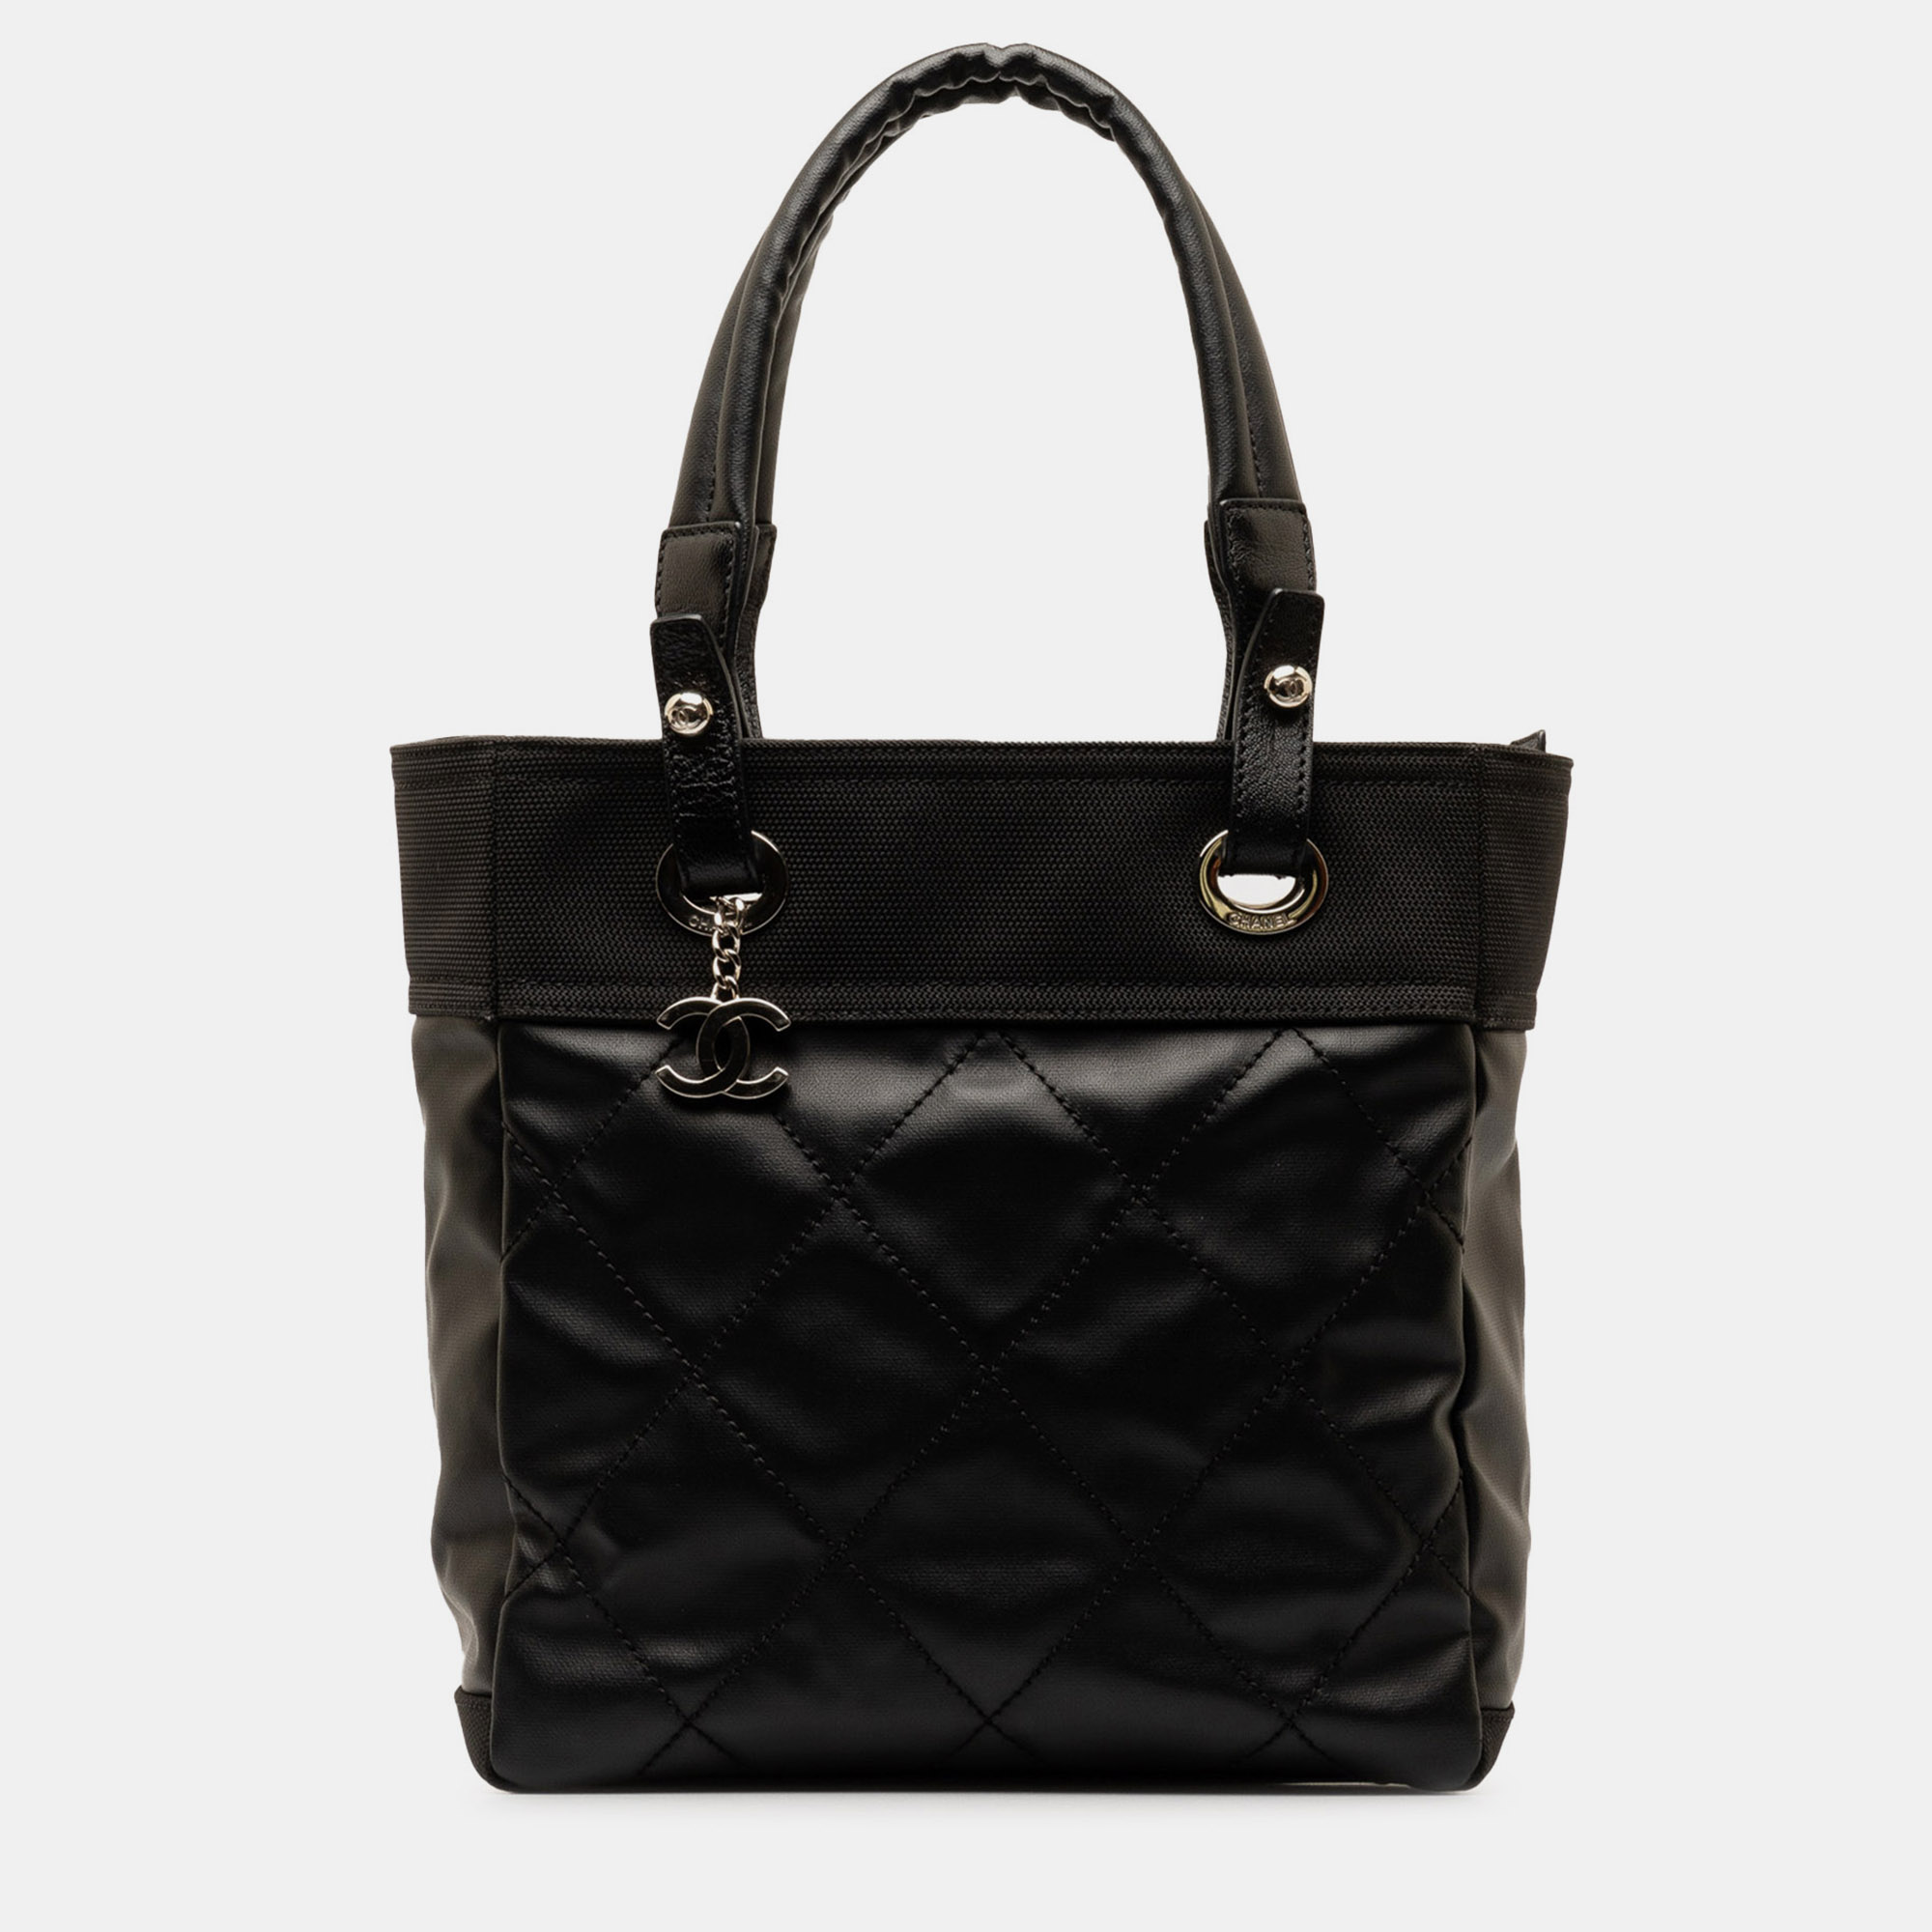 Pre-owned Chanel Paris Biarritz Pm Tote In Black